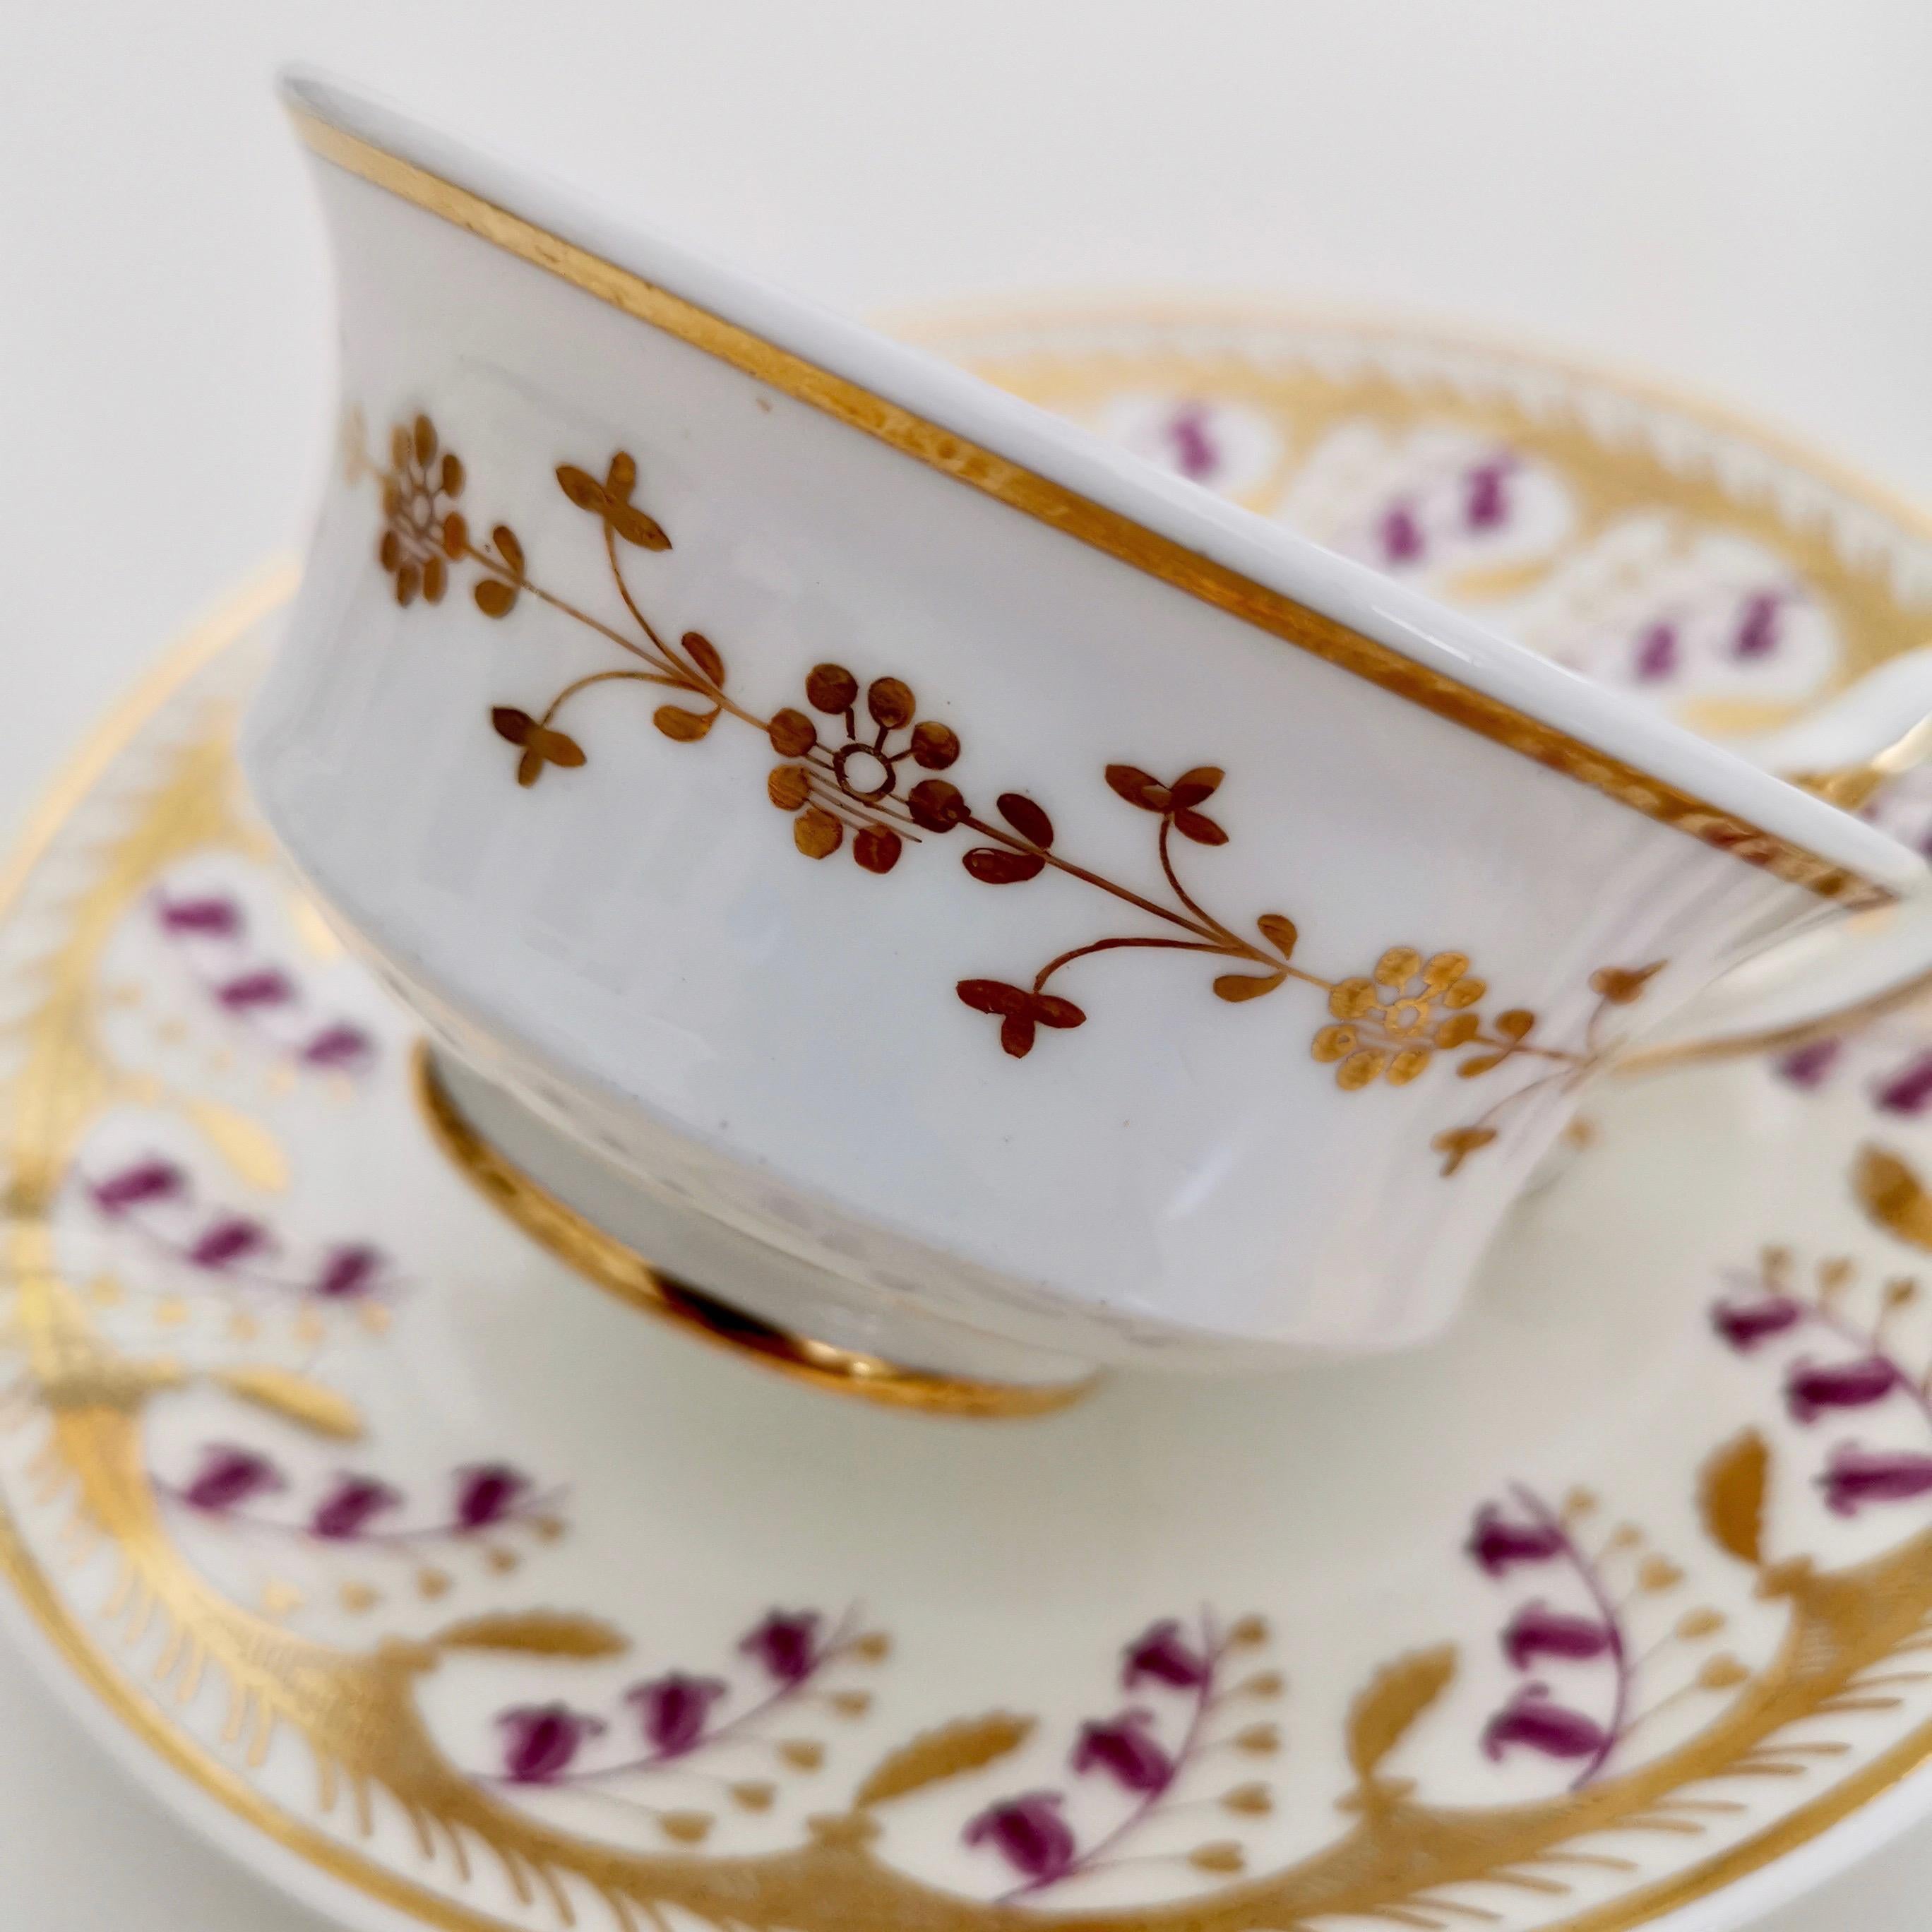 Early 19th Century Spode Felspar Porcelain Teacup Trio, White with Harebell Pattern, Regency, 1826